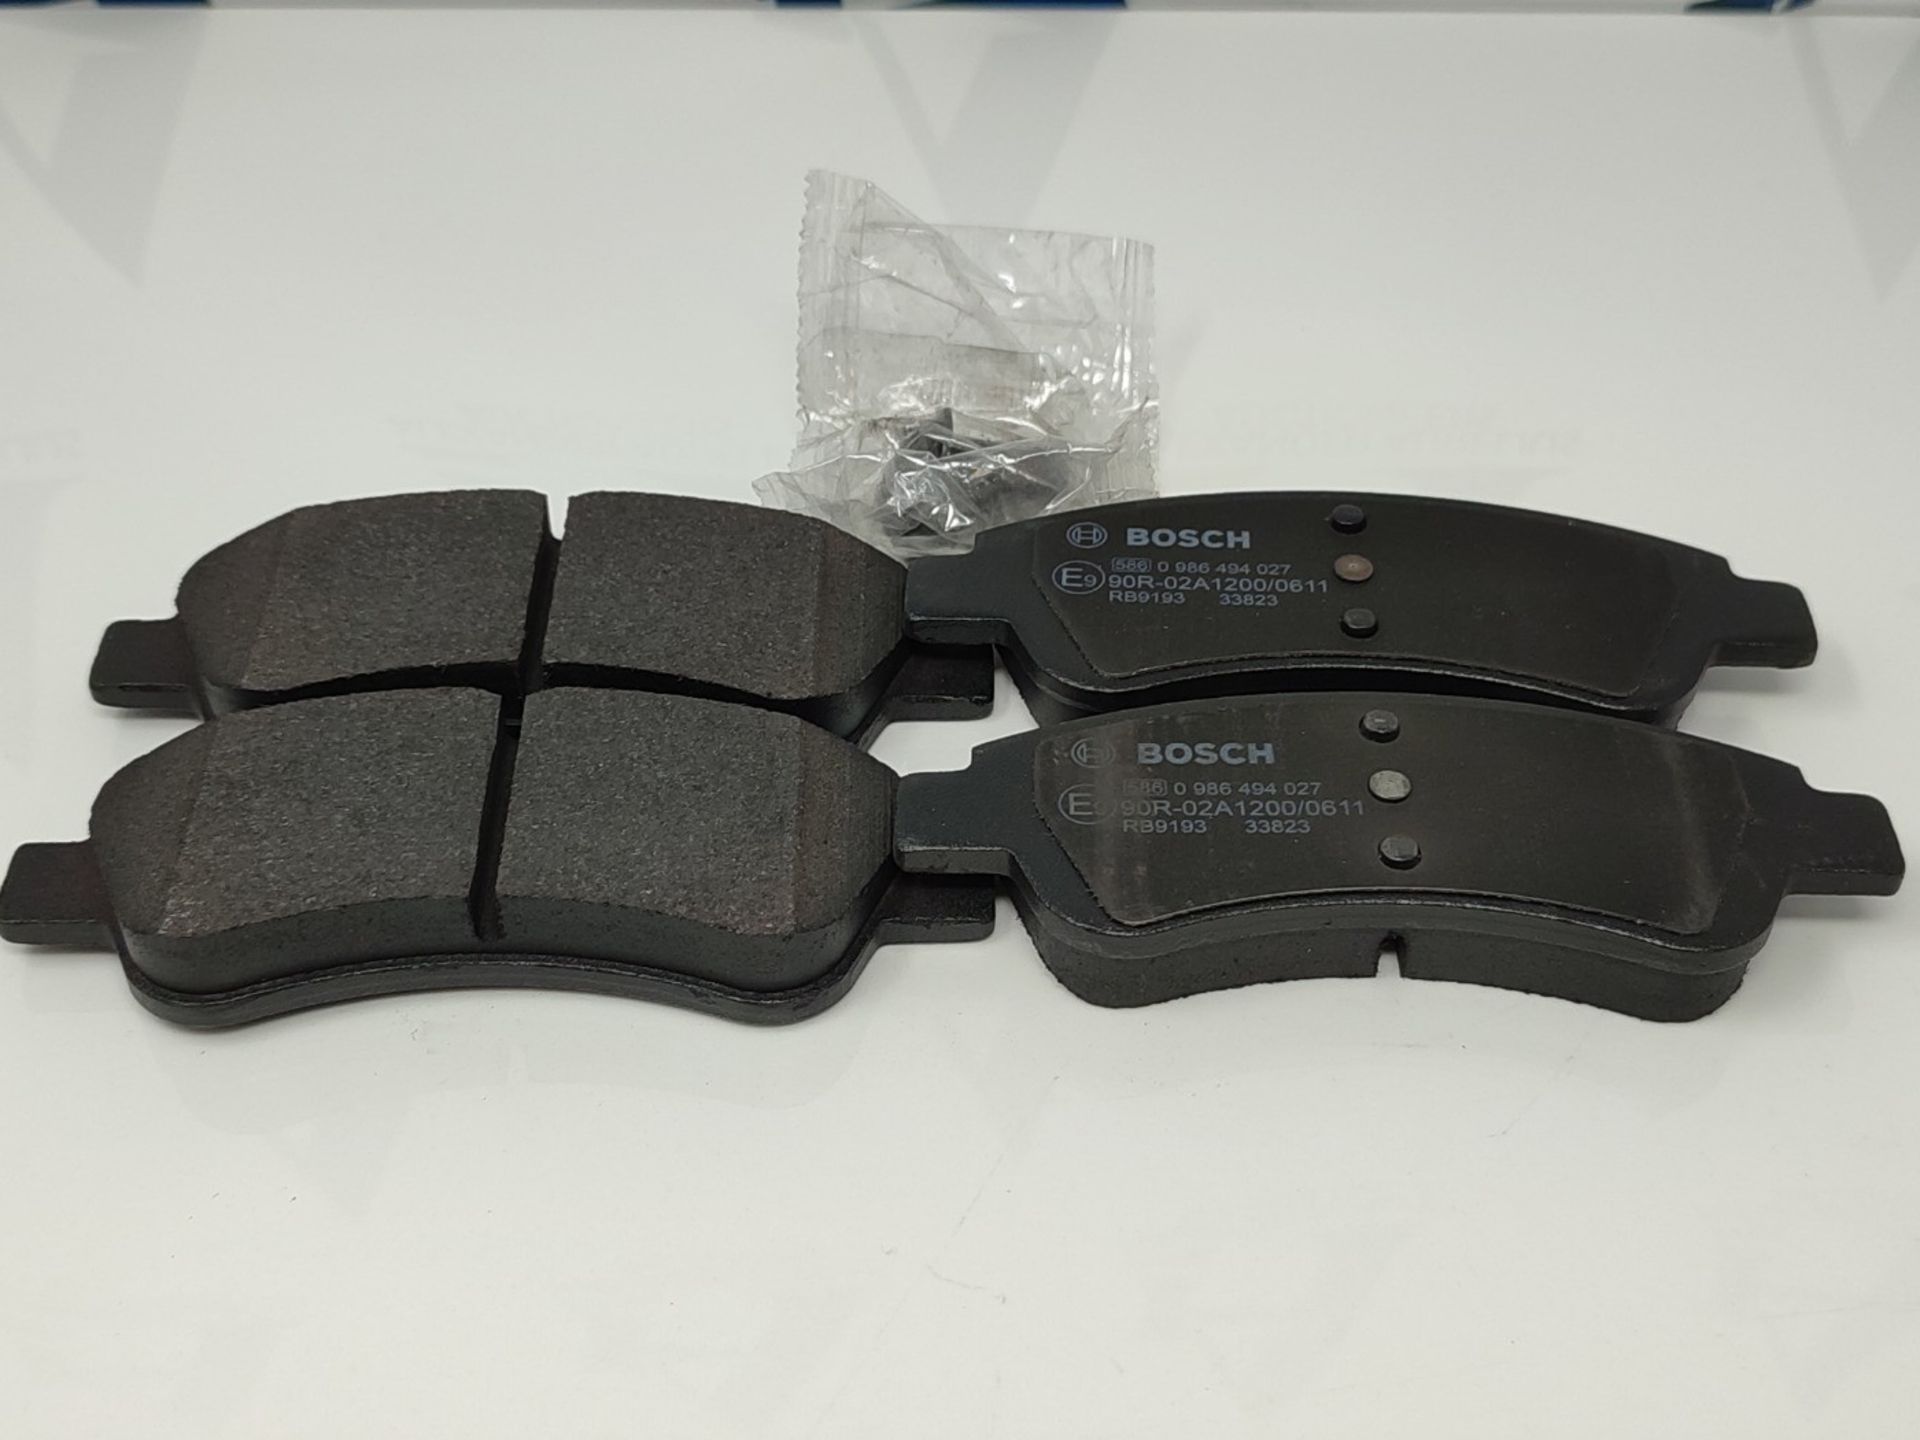 Bosch BP318 Brake Pads - Front Axle - ECE-R90 Certified - 1 Set of 4 Pads - Image 3 of 3